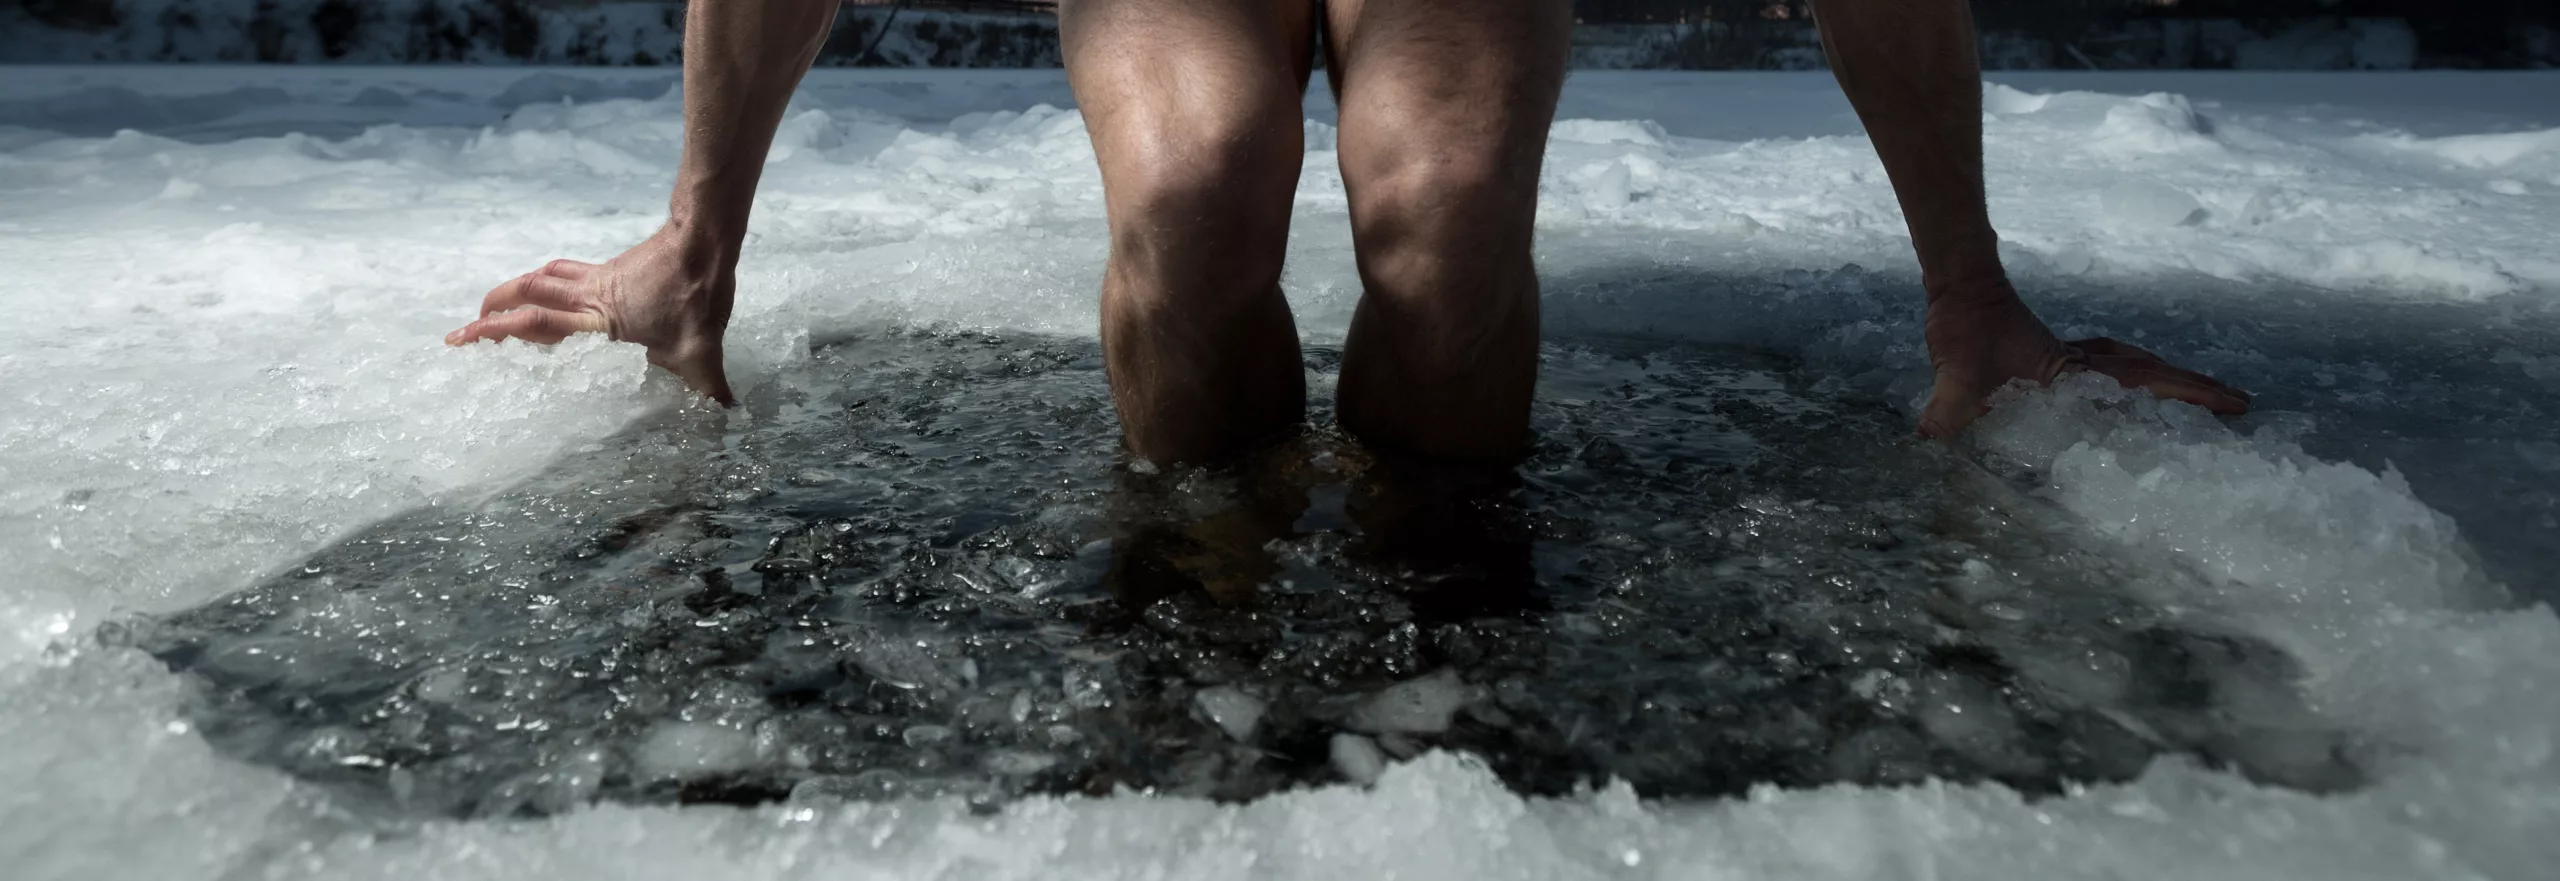 Cold Feet Research Suggests Specific Proteins As A Cause